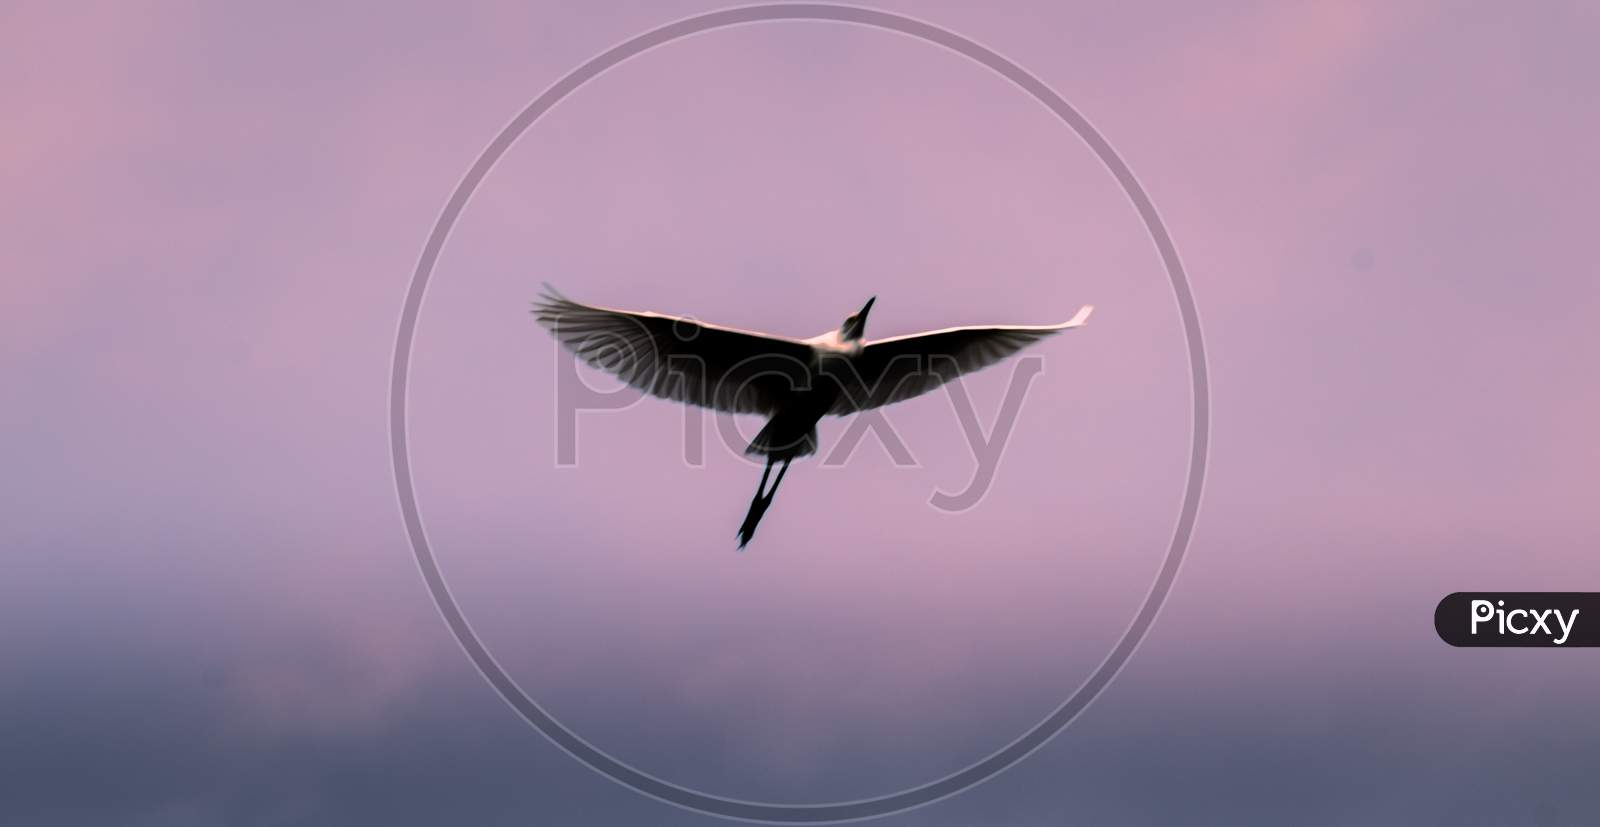 Egret Flying Over The Dusky Sky, Showing Birds Full Wings Span, Light Hitting And Glowing Feathers.